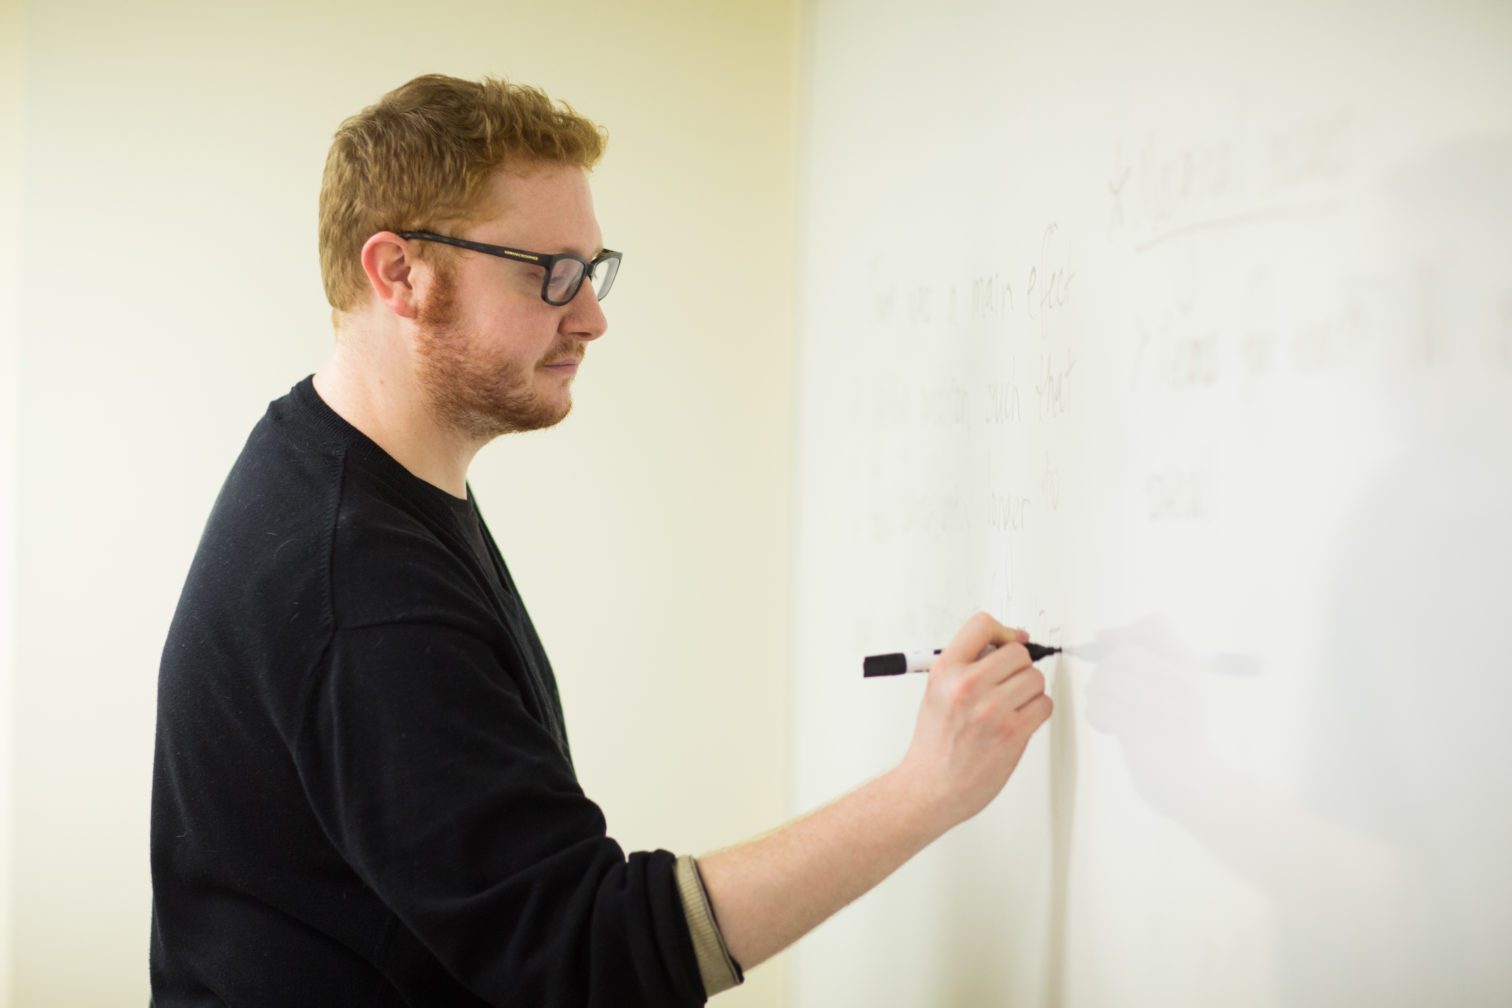 Dr. Wagner writing on a white board